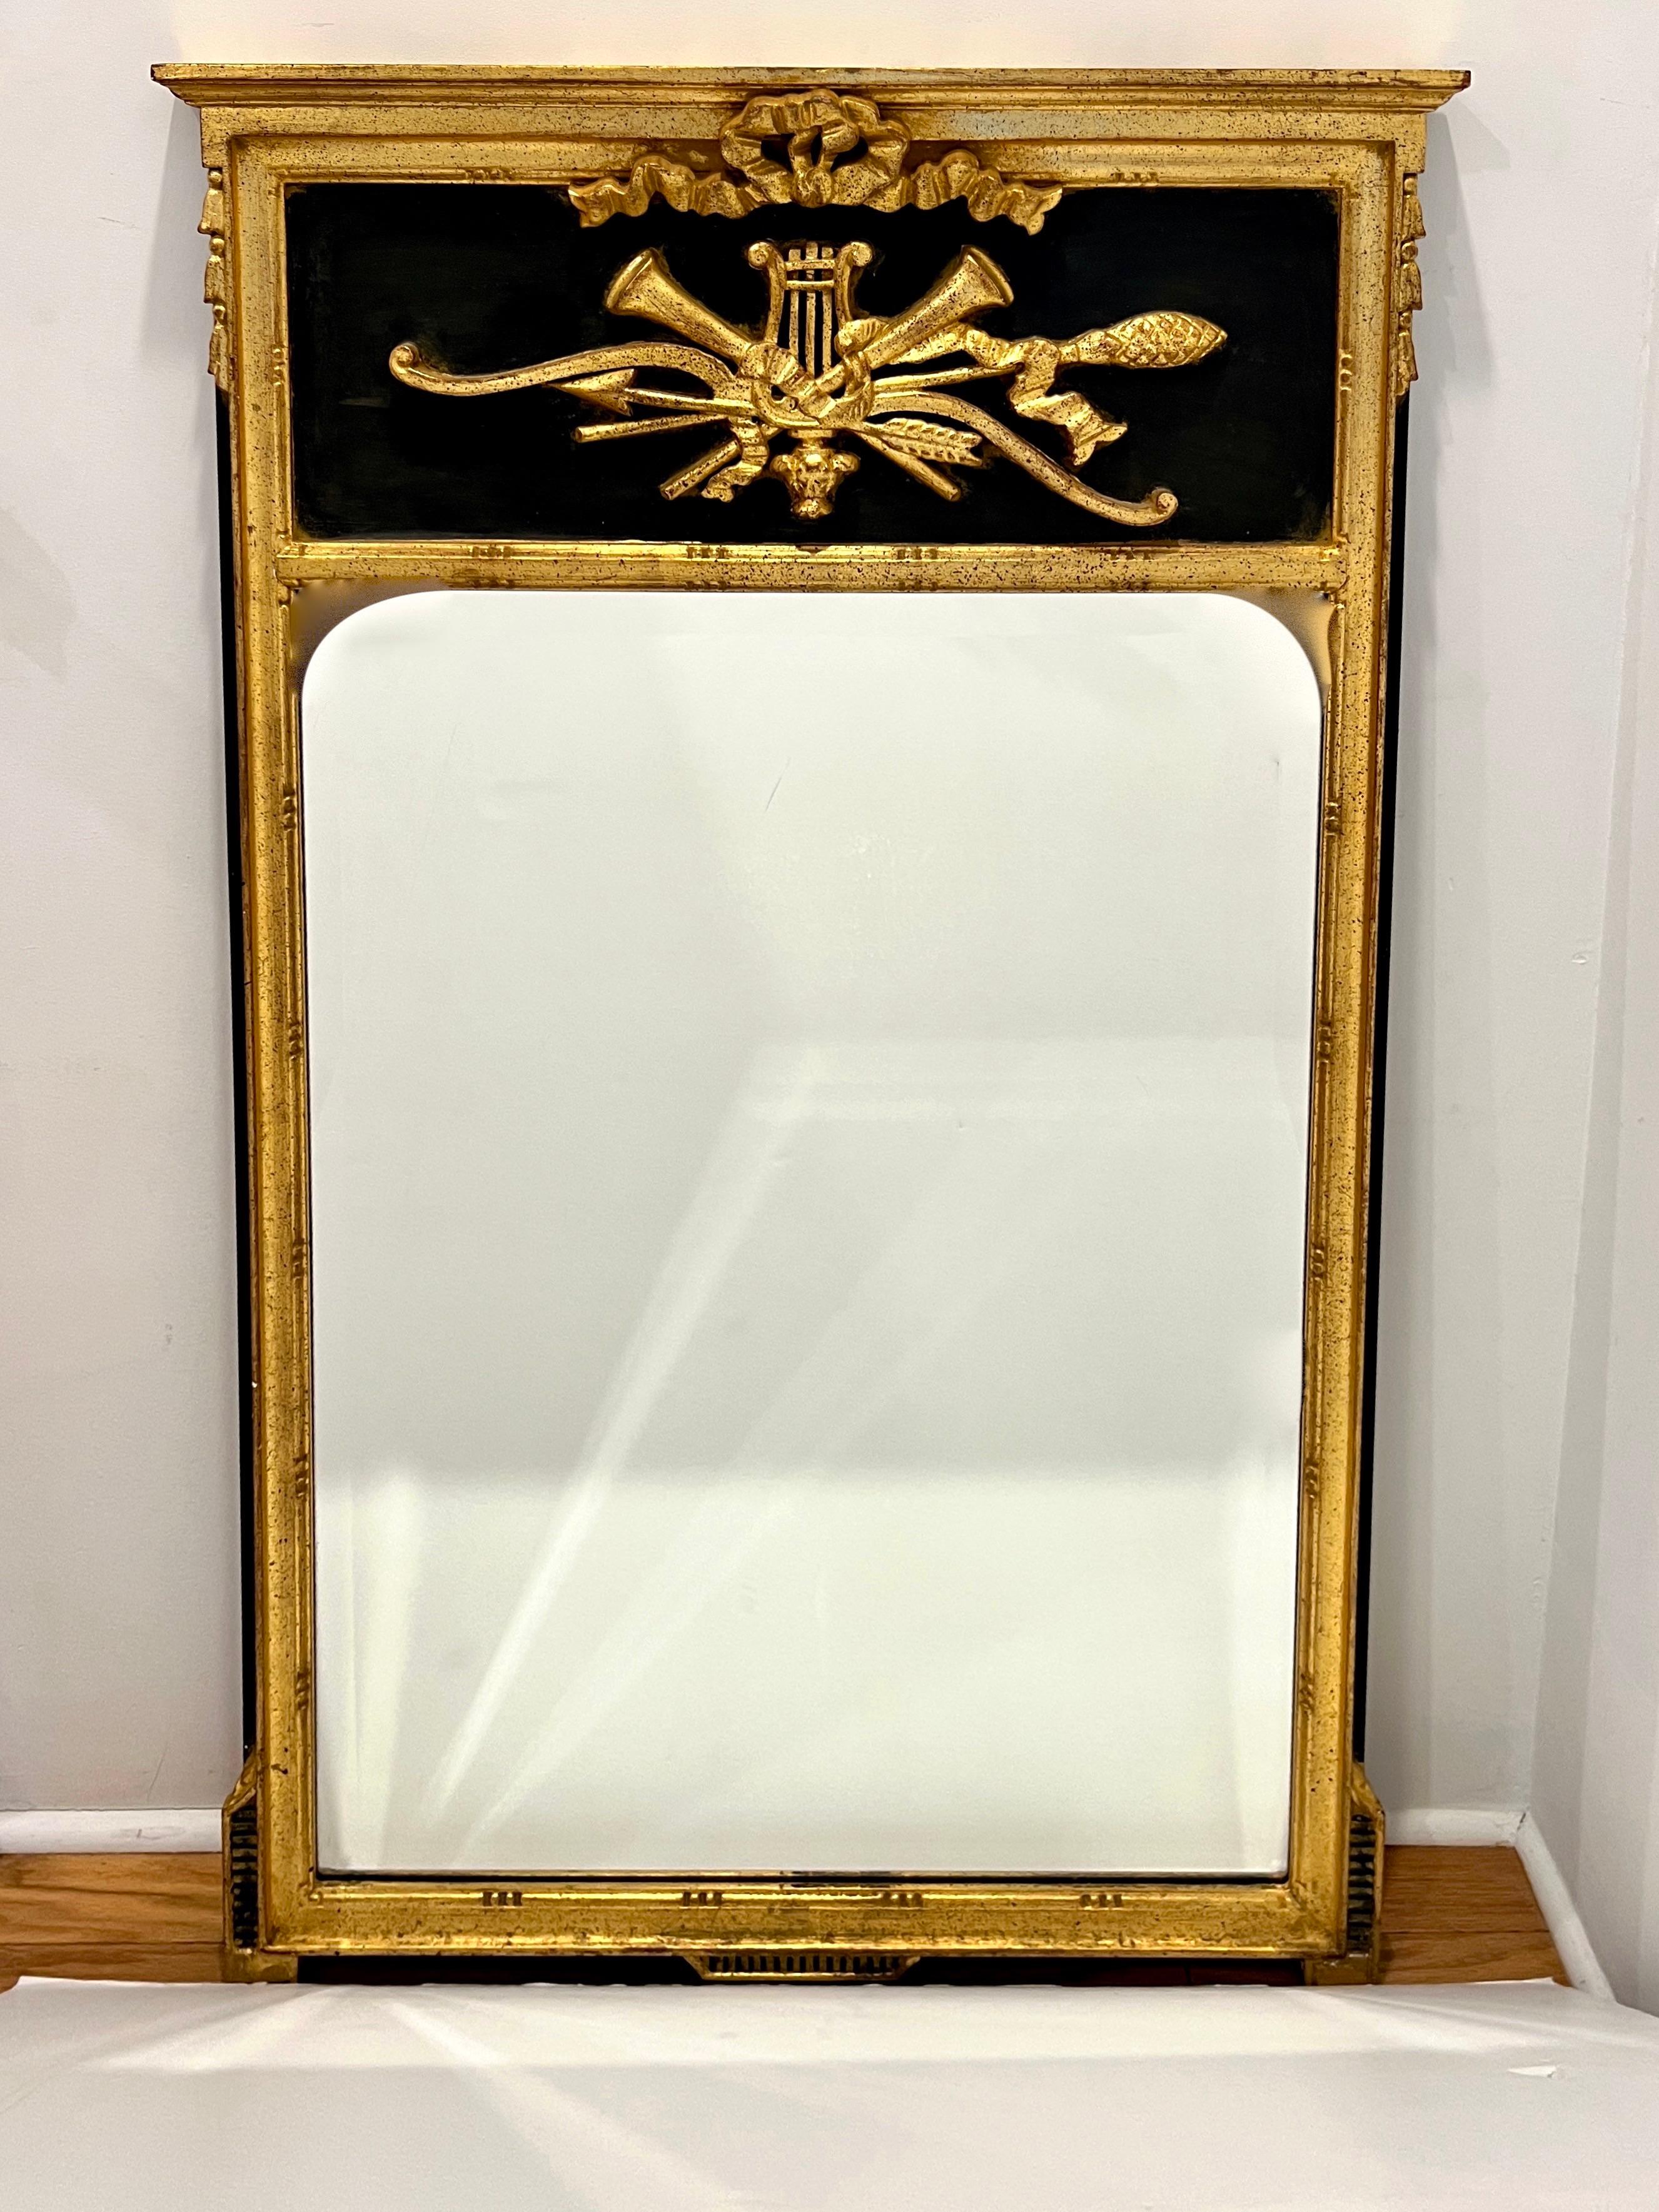 Italian Louis XVI Neoclassical Trumeau Mirror with Giltwood and Black Frame